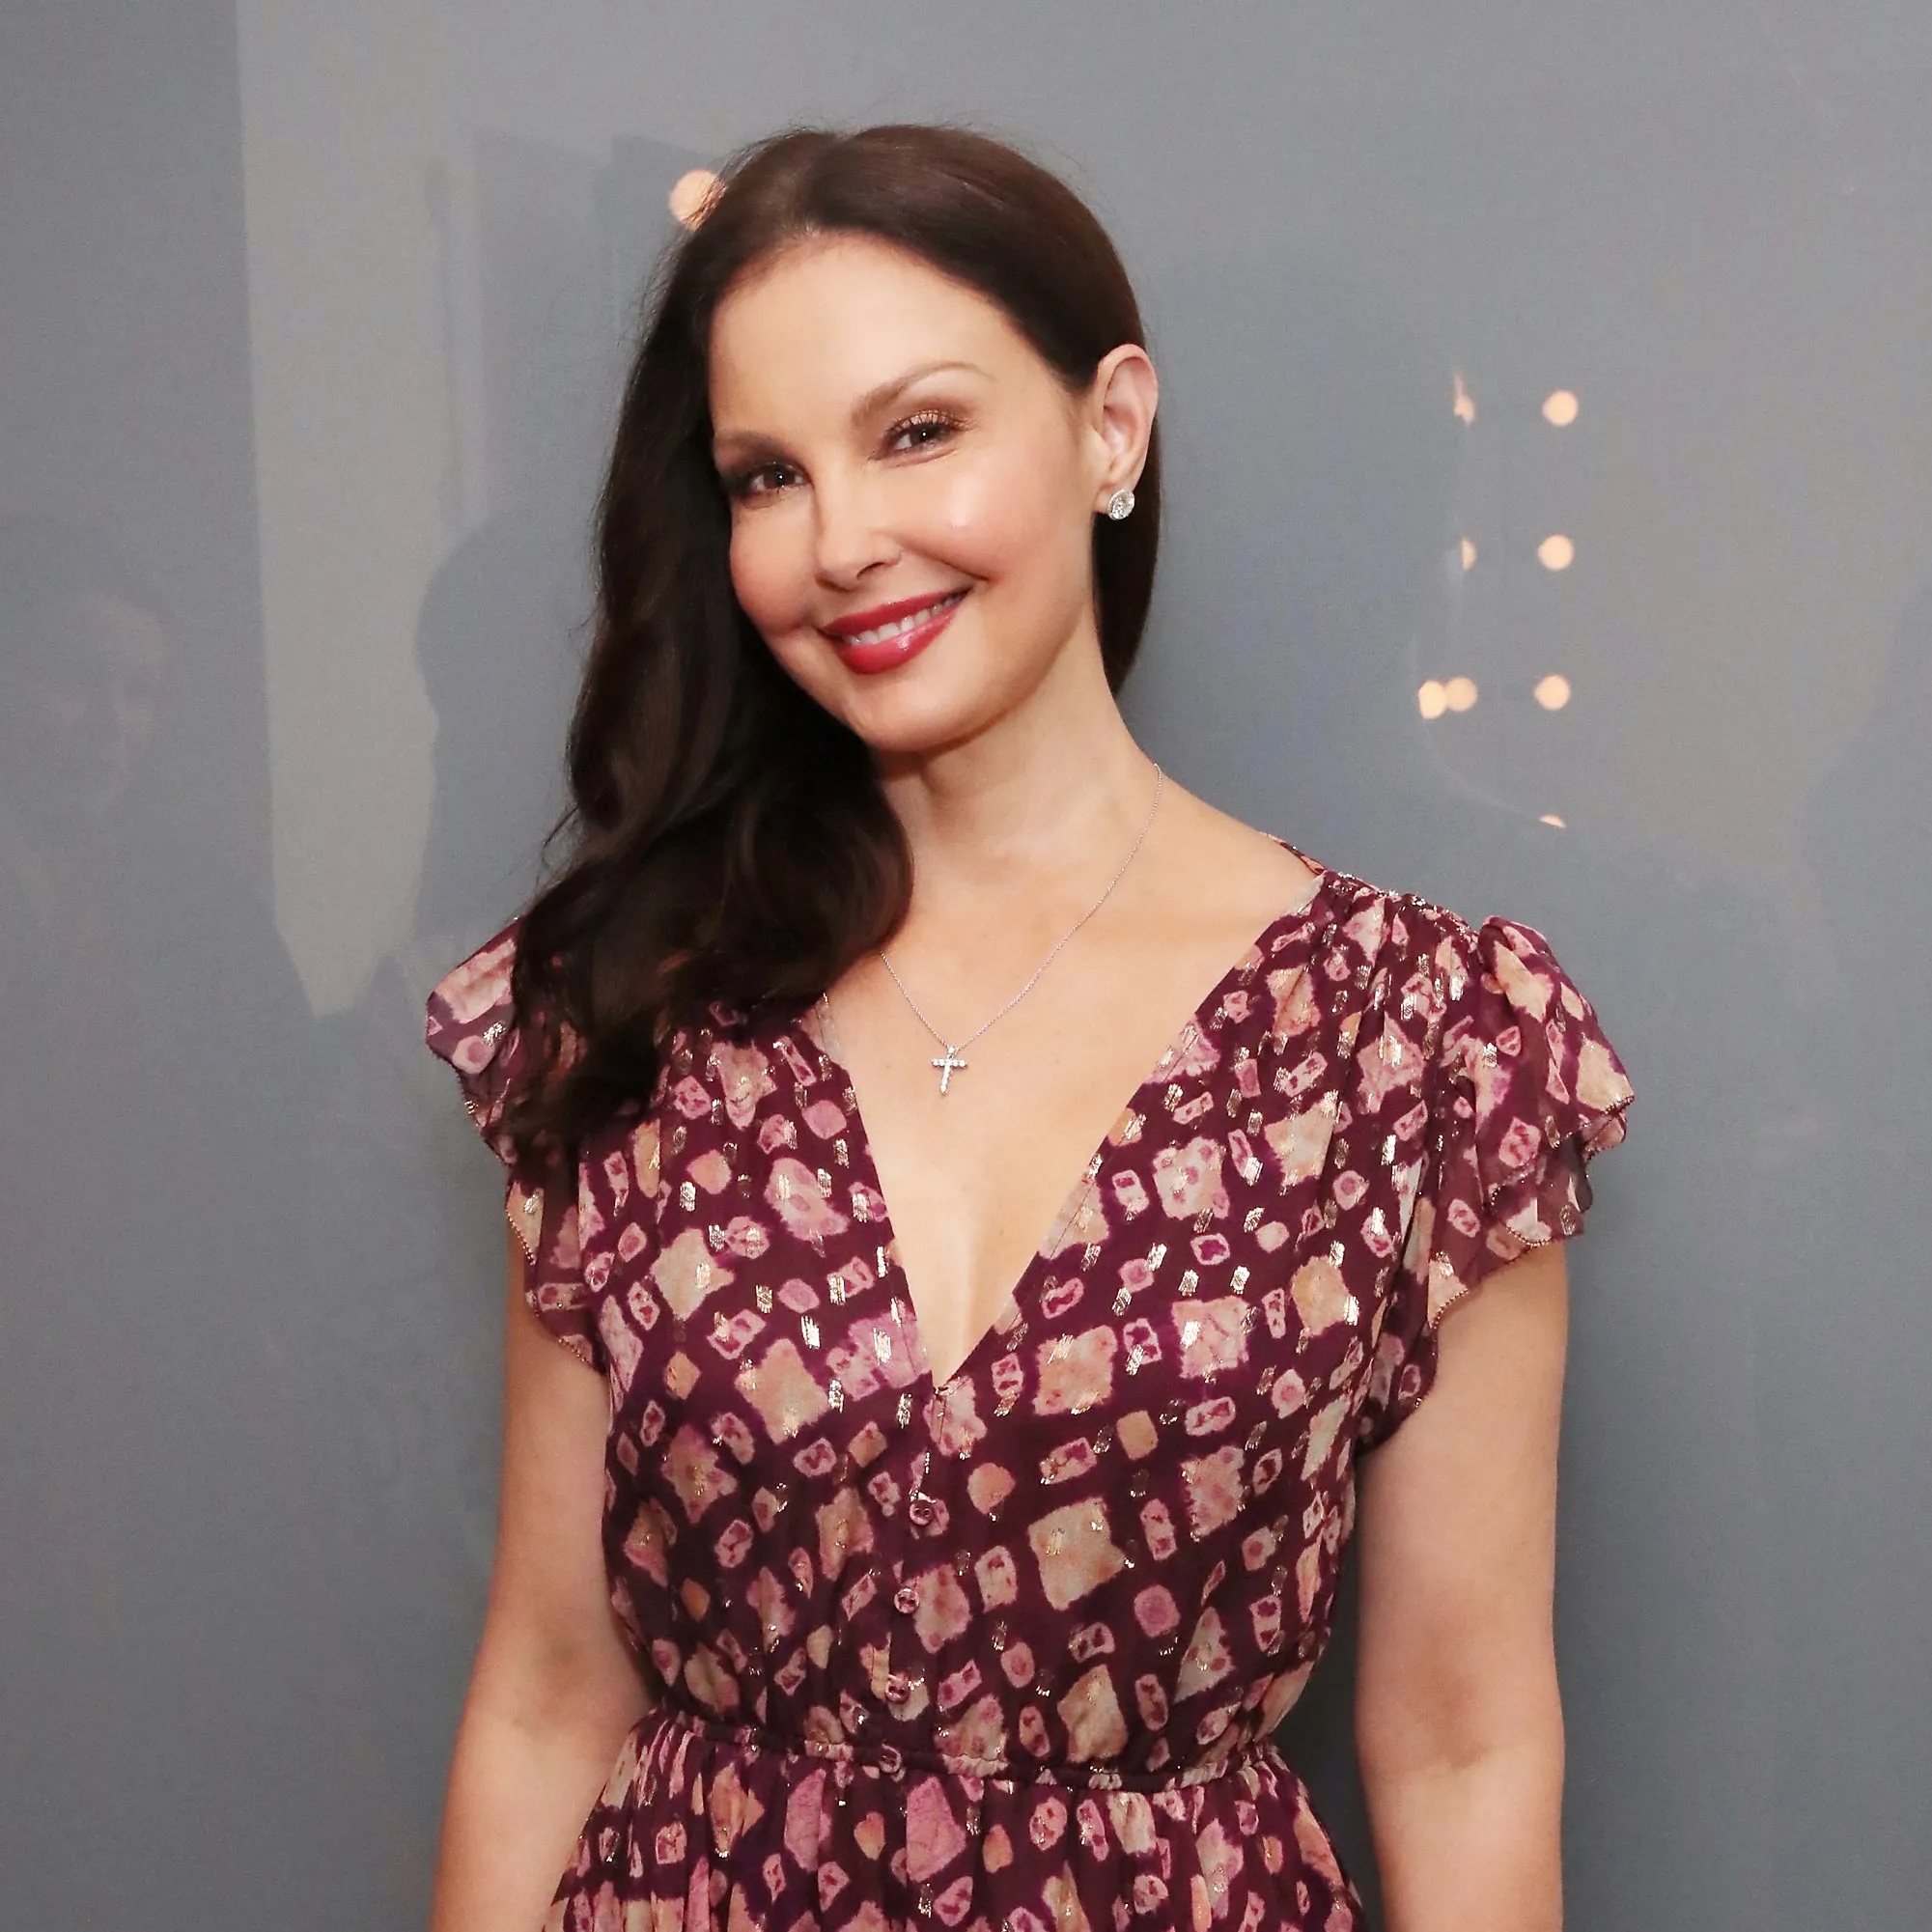 Ashley Judd Age: How Old Is Ashley Judd Now?